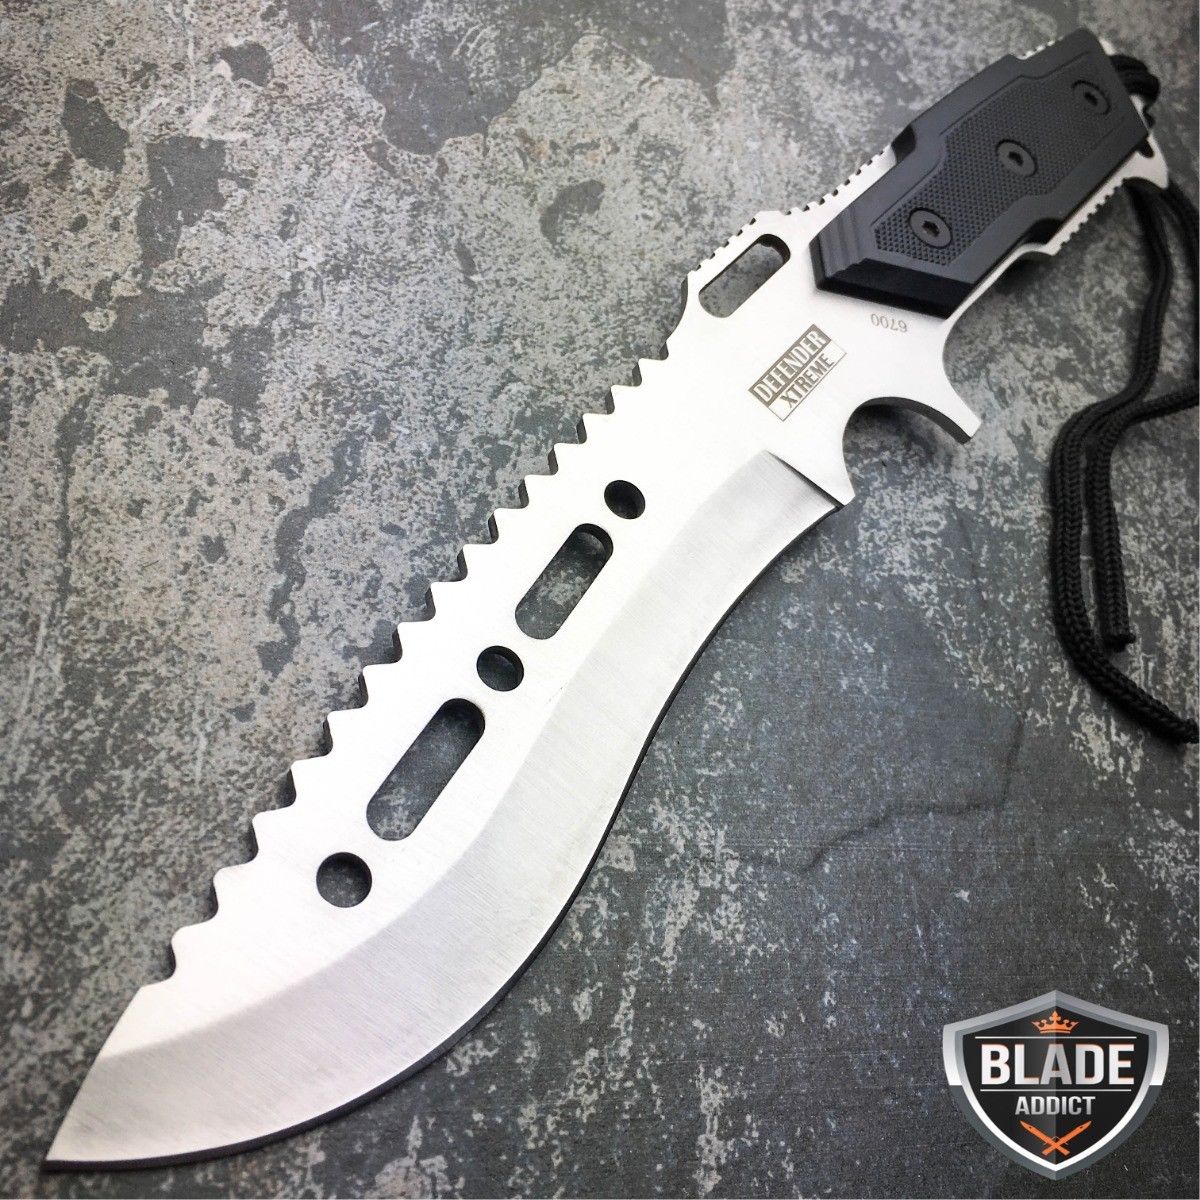 12" STONEWASH TACTICAL SURVIVAL RAMBO FULL TANG FIXED BLADE KNIFE HUNTING BOWIE